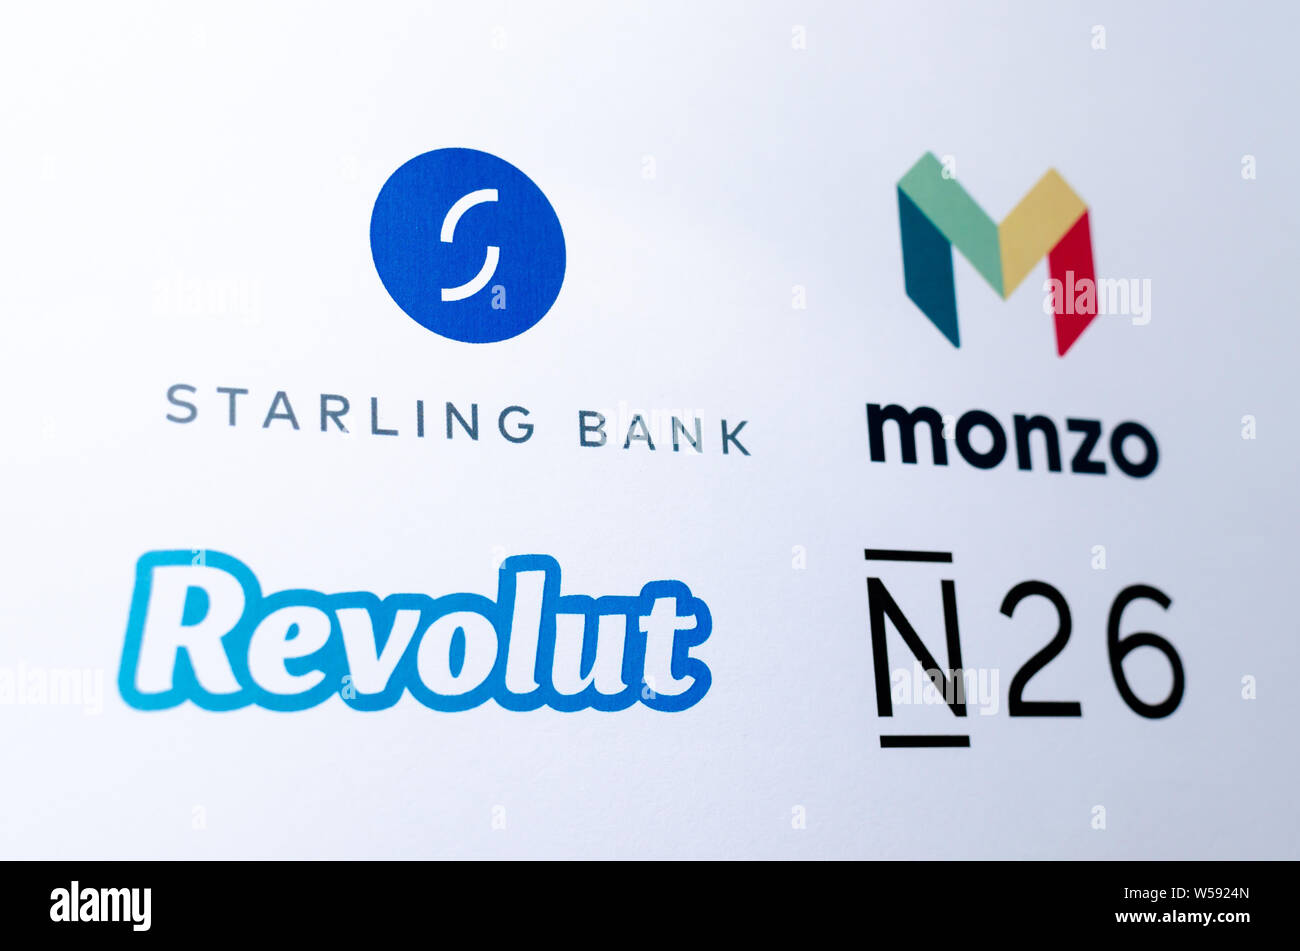 Logos of competing fintech companies that represents virtual banks: Monzo, Revolut, Starling Bank, N26, Printed on paper. Stock Photo